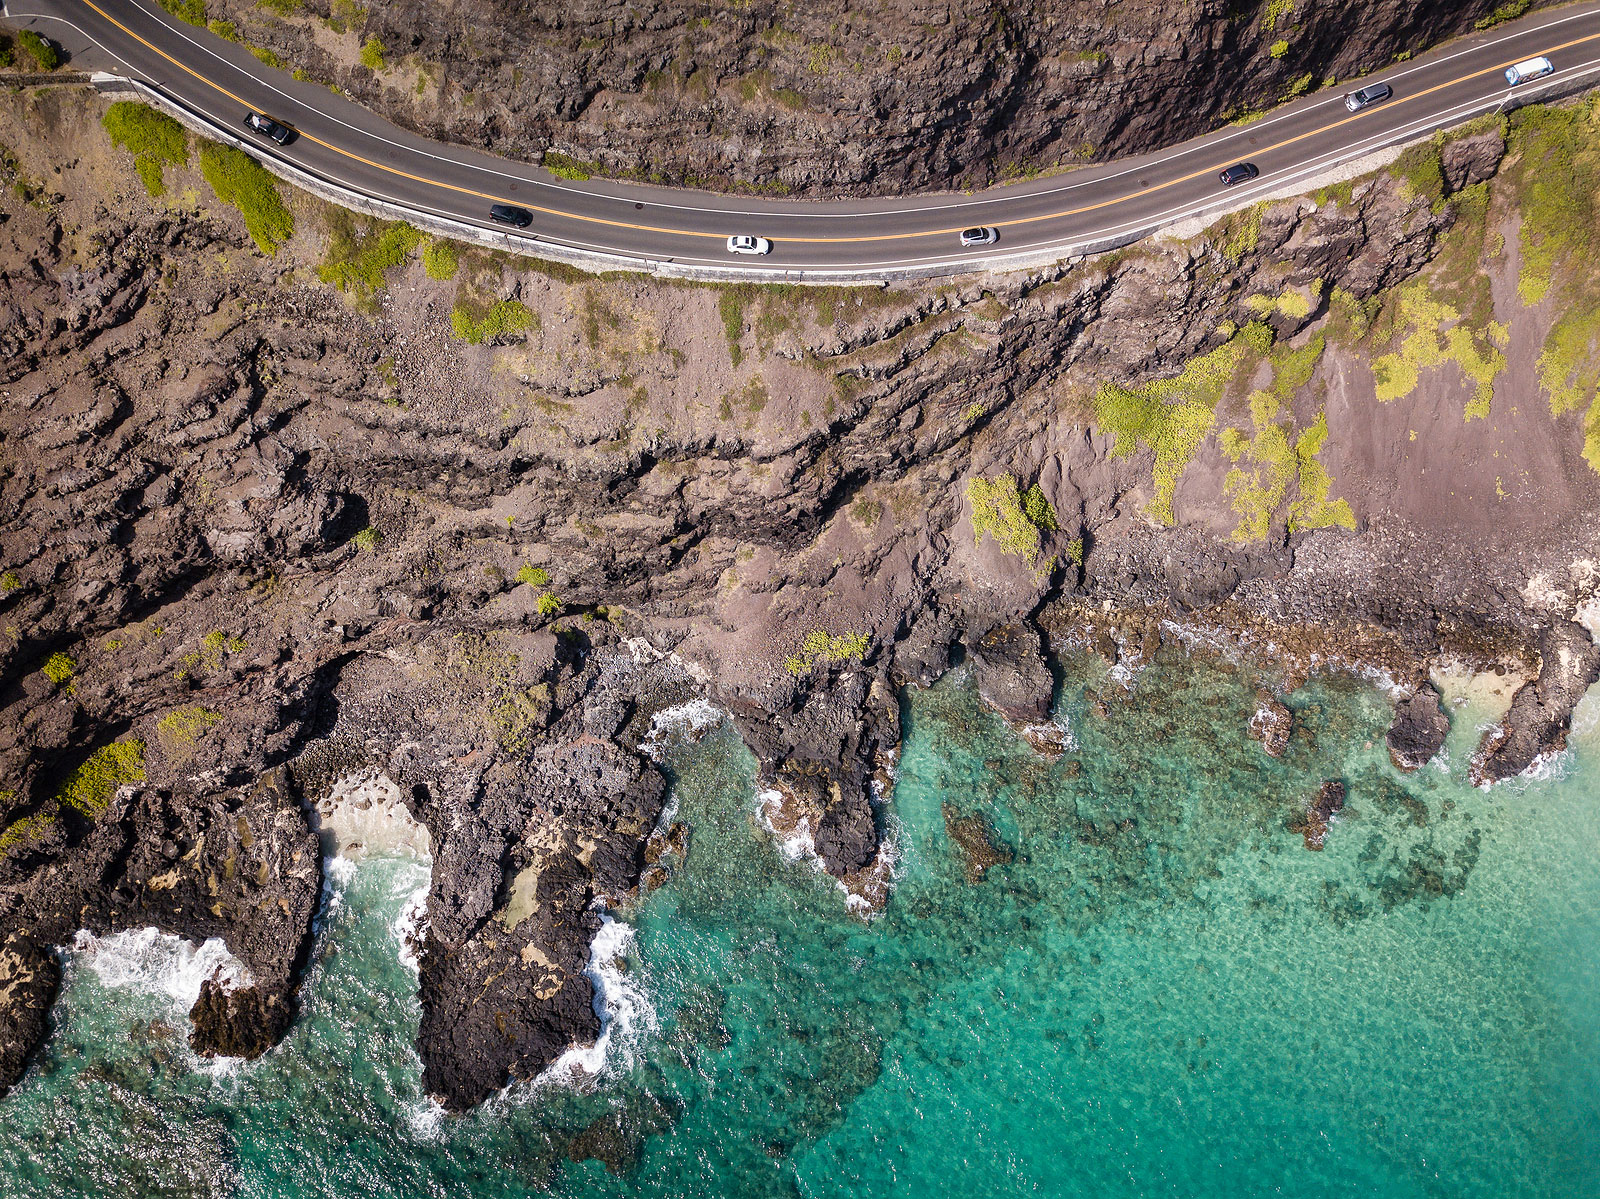 5 Things To Do That Require a Rental Car in Oahu